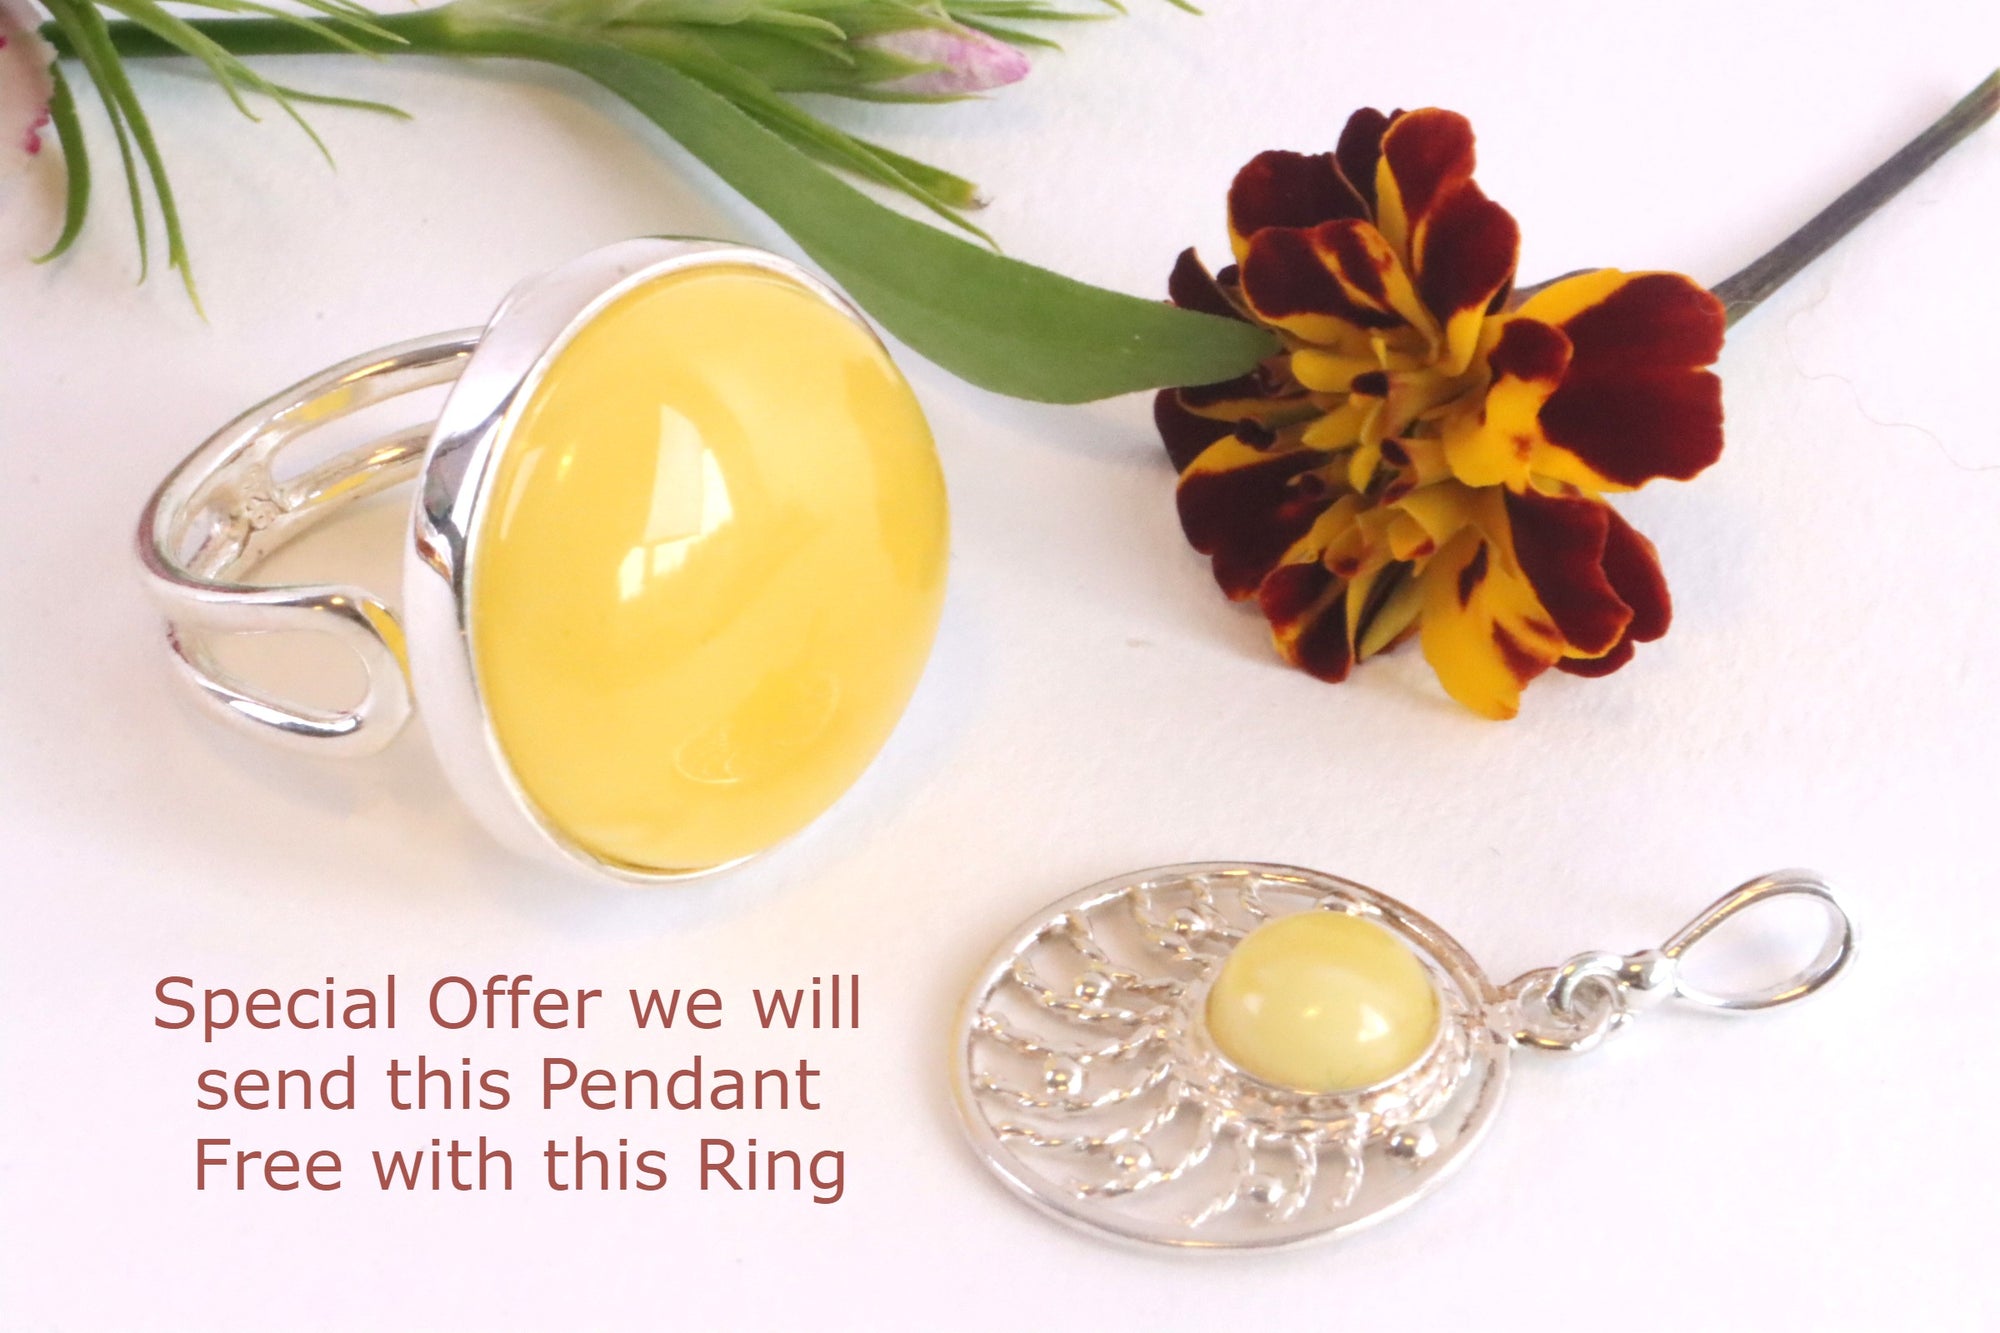 Sterling Silver White Baltic Amber Ring / Free Pendant Included